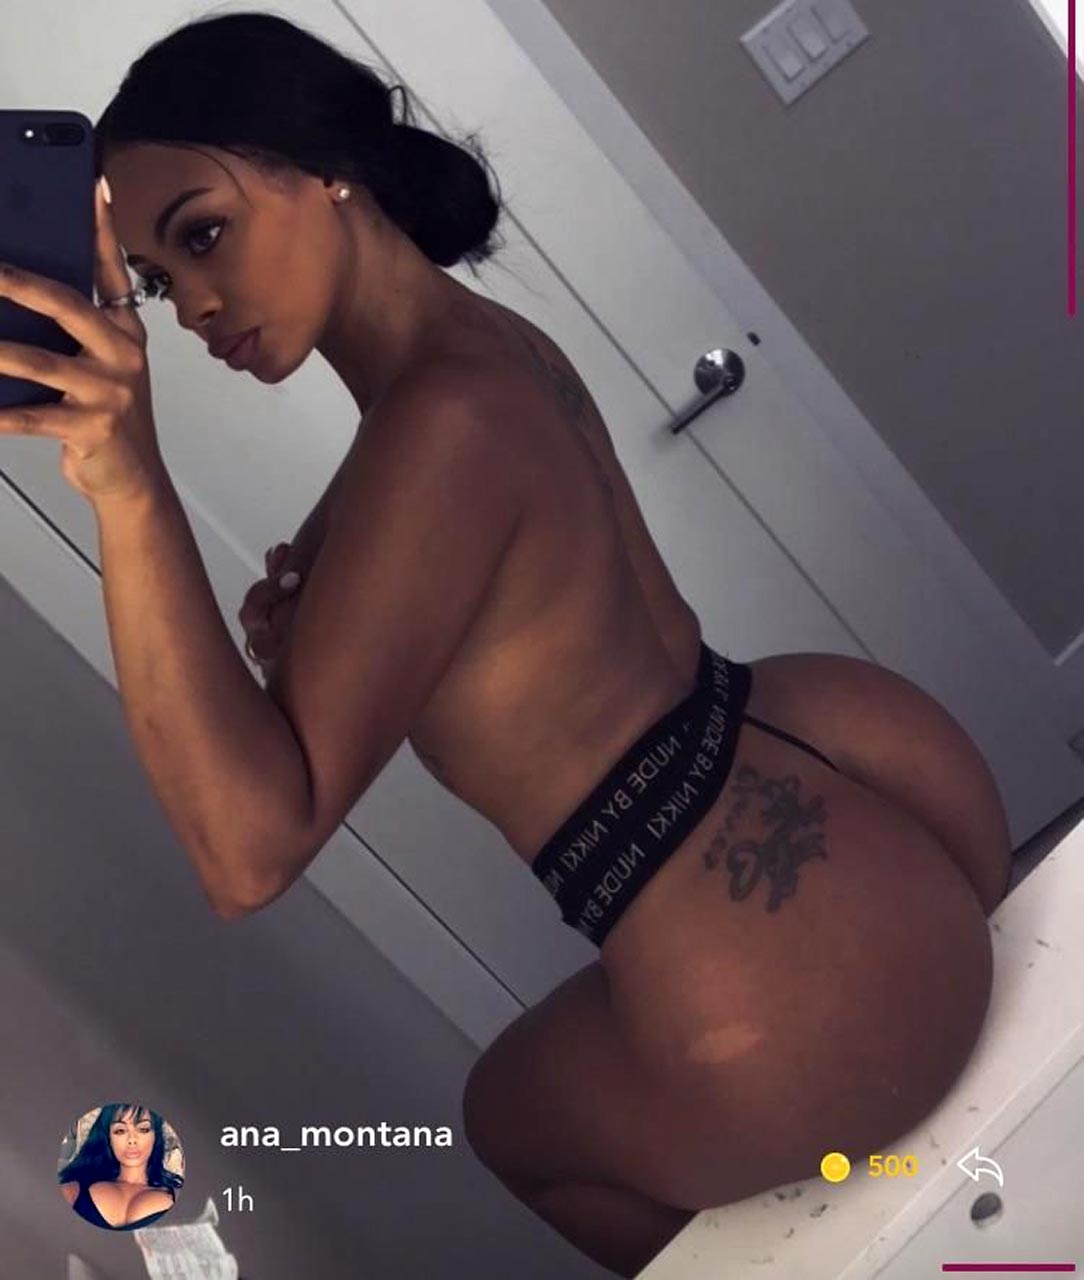 Analicia Chaves Nude Leaked Pics And Ana Montana Porn Video, Analicia Chave...